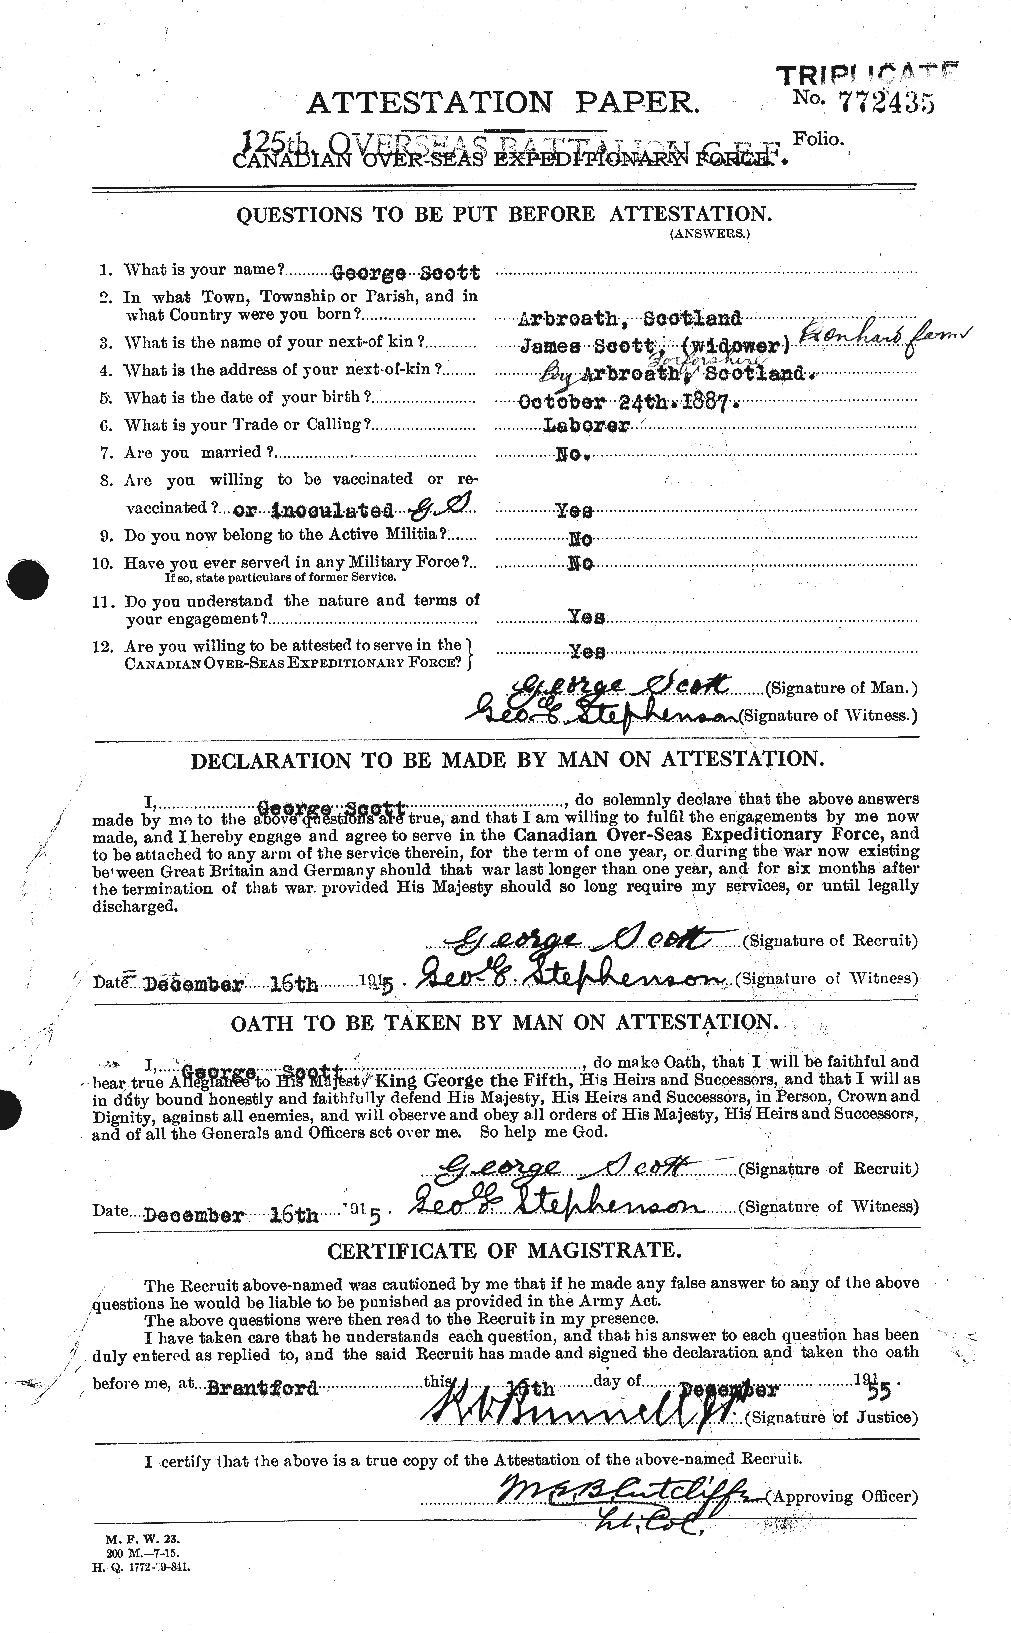 Personnel Records of the First World War - CEF 084352a